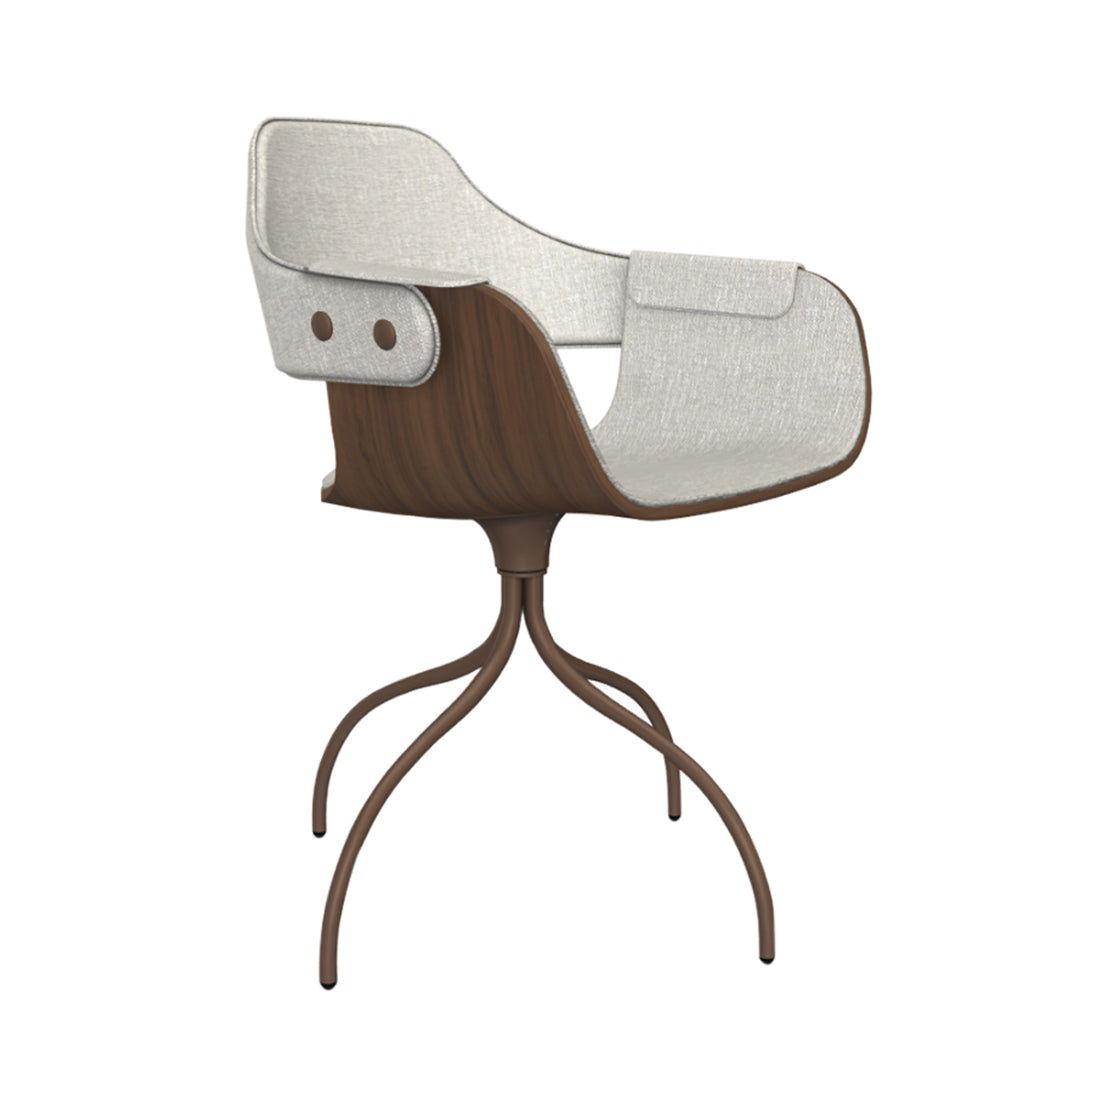 Showtime Nude Chair with Swivel Base: Full Upholstered + Walnut + Pale Brown